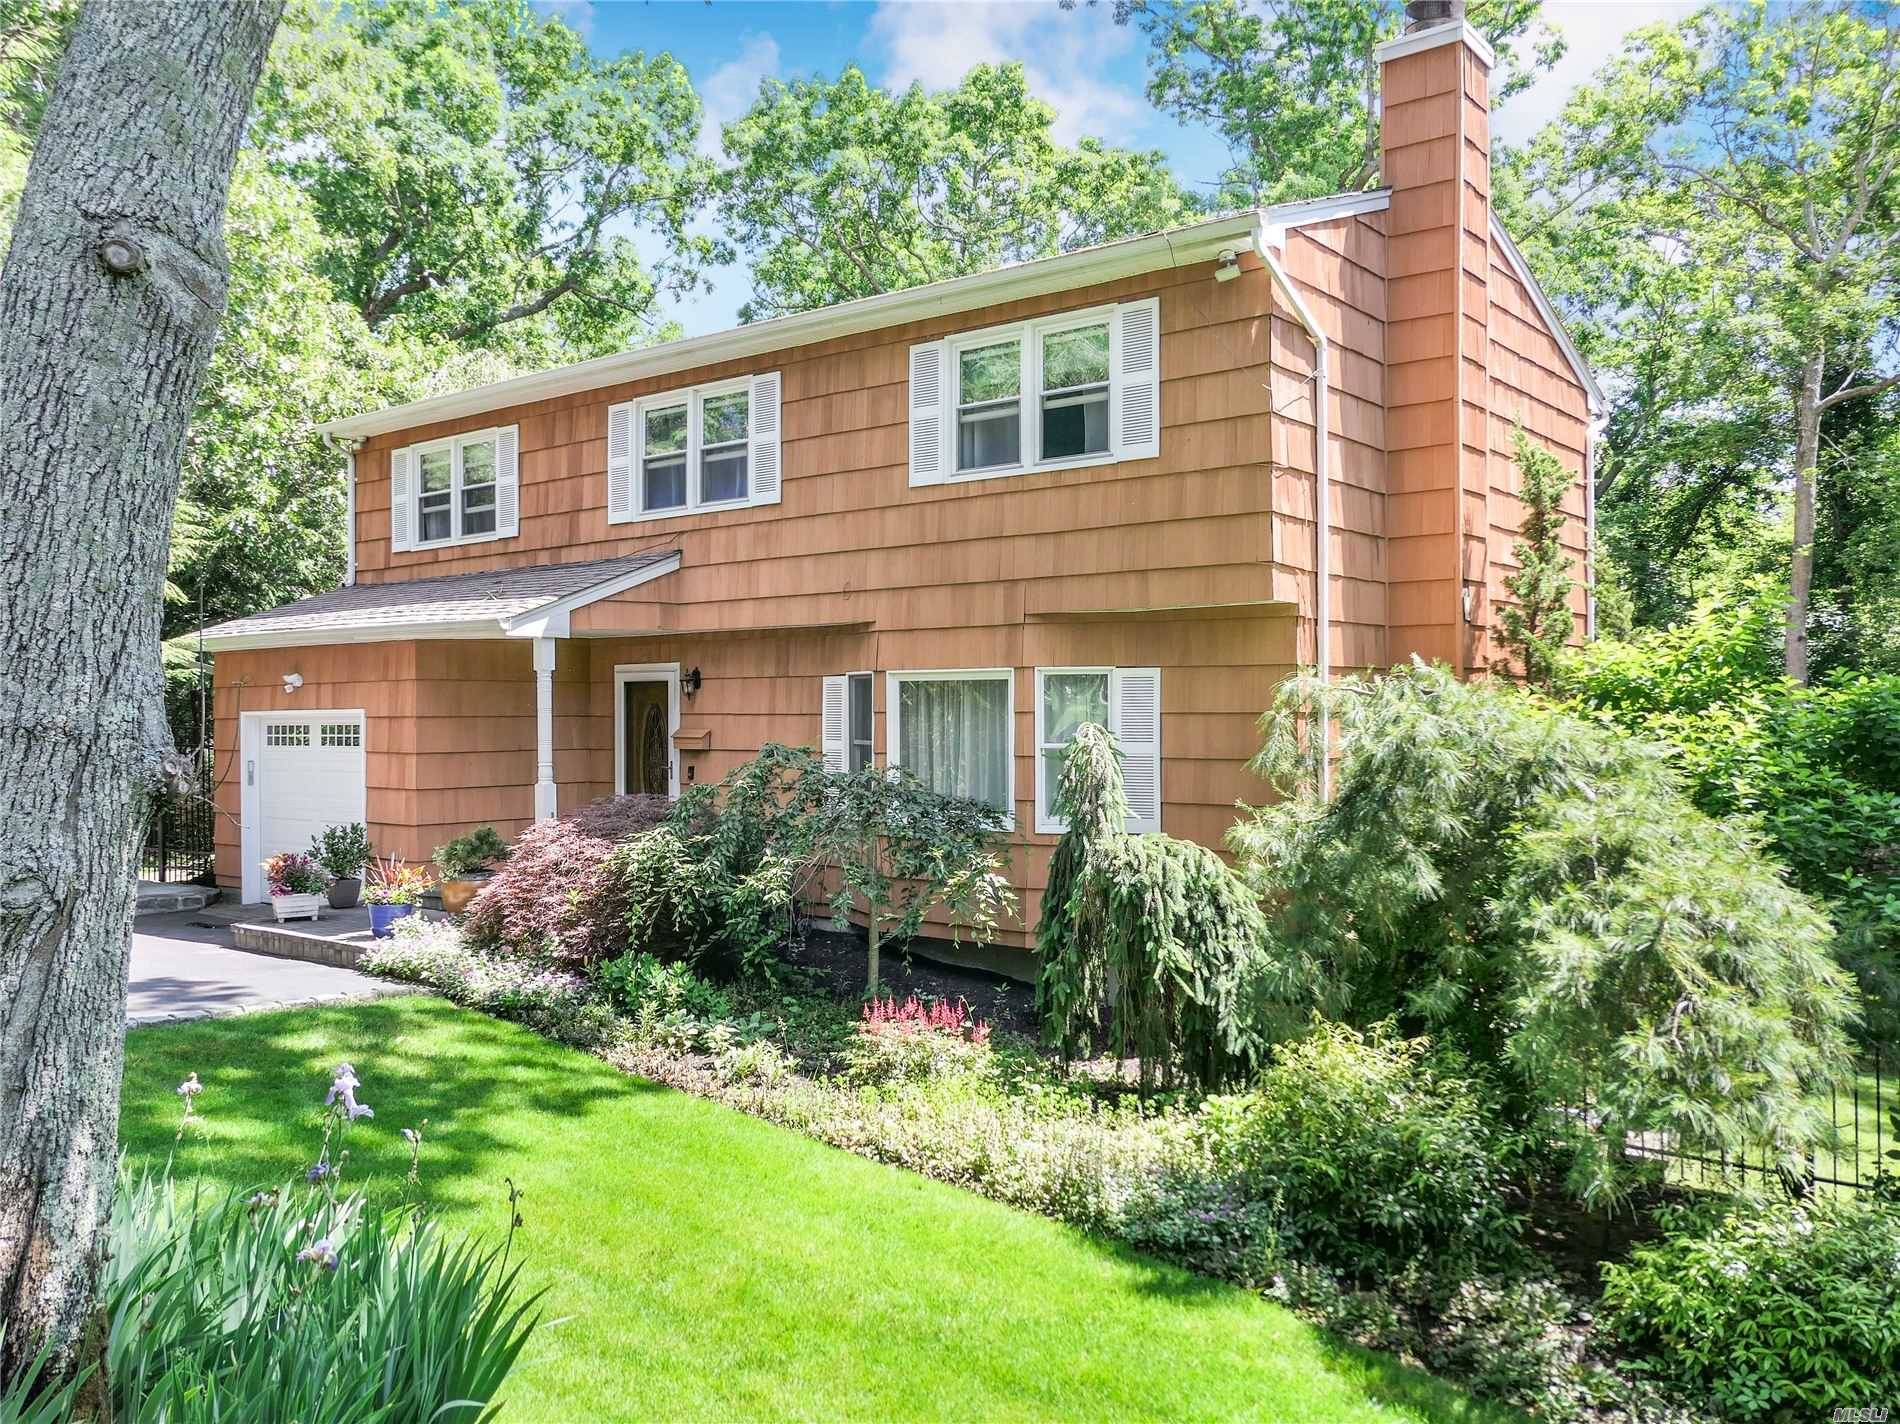 Nestled On Meticulously Kept Landscaping In The Heart Of Bellport Village This Beautiful Colonial Is Pure Serenity.